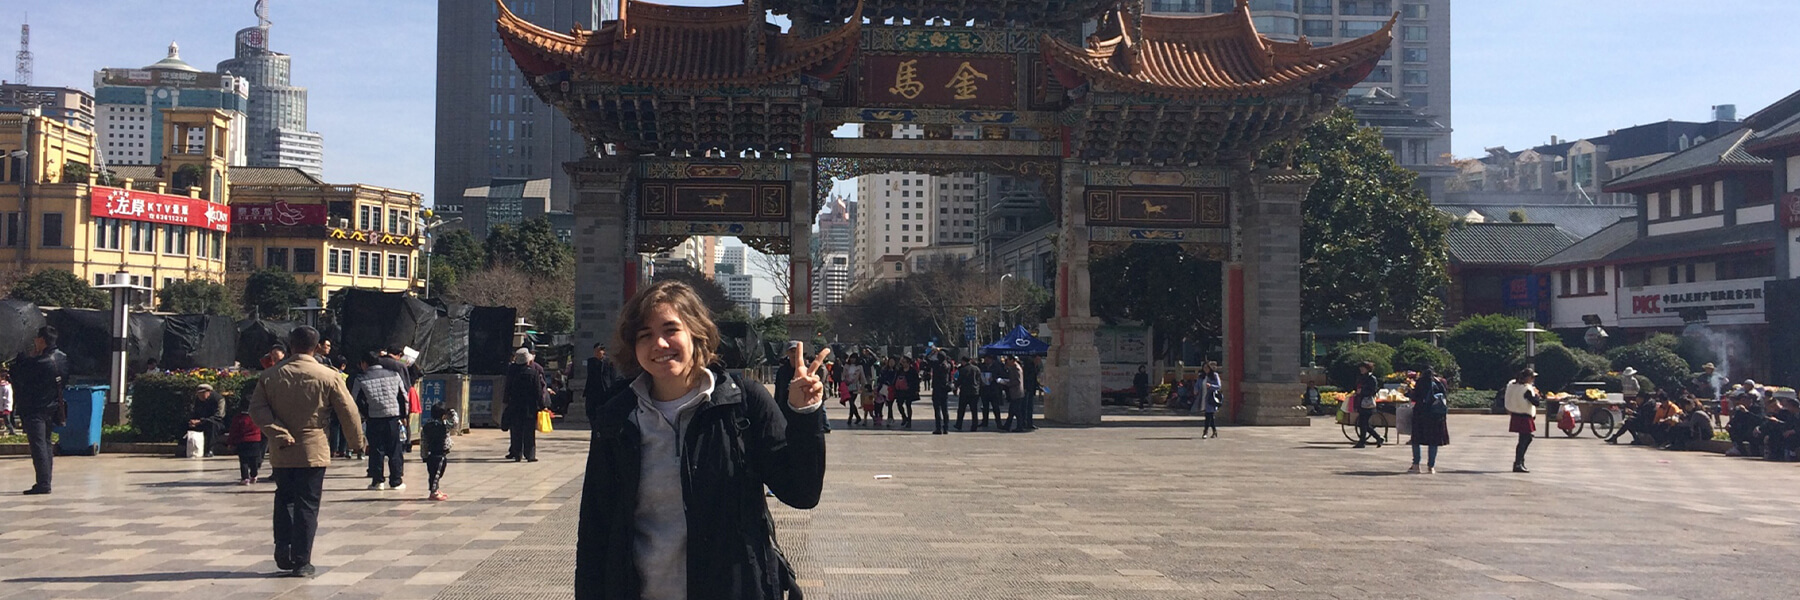 A student posing in front of a Chinese arch